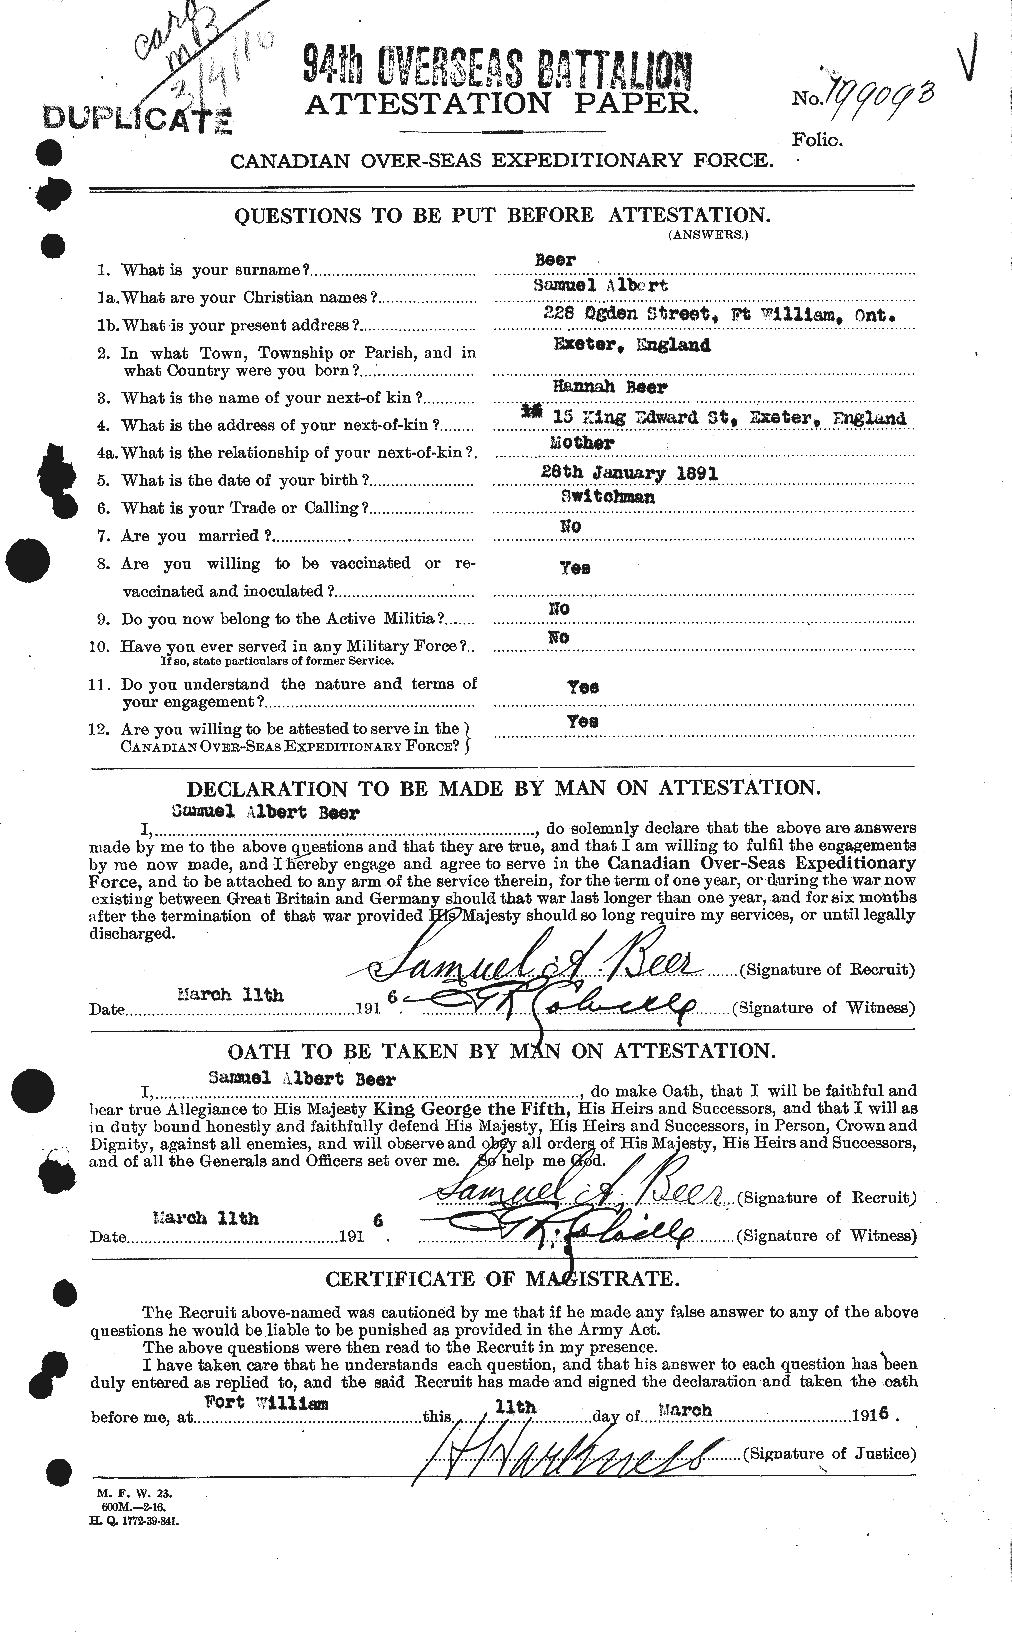 Personnel Records of the First World War - CEF 241568a